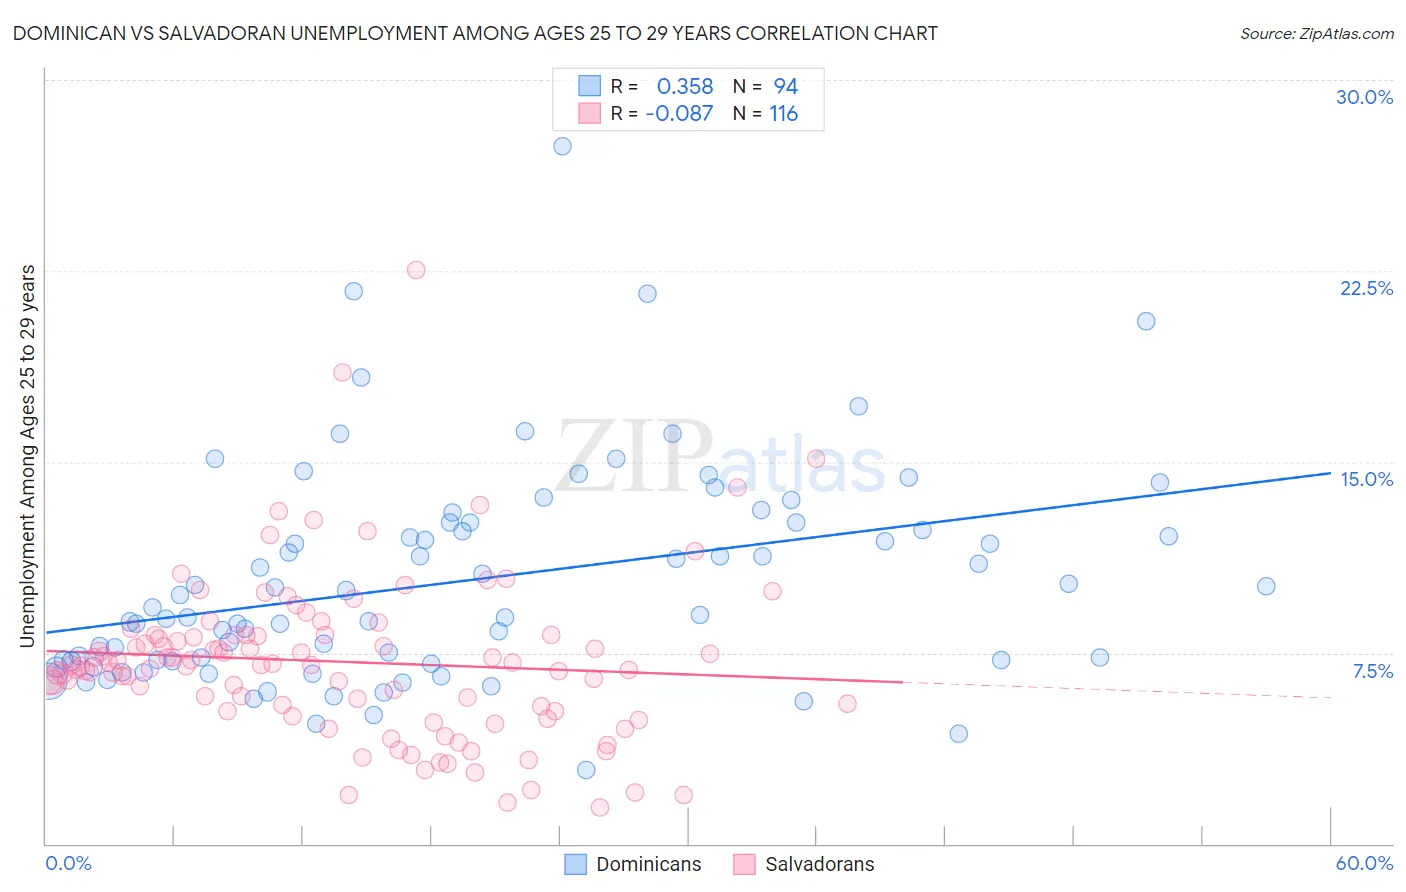 Dominican vs Salvadoran Unemployment Among Ages 25 to 29 years